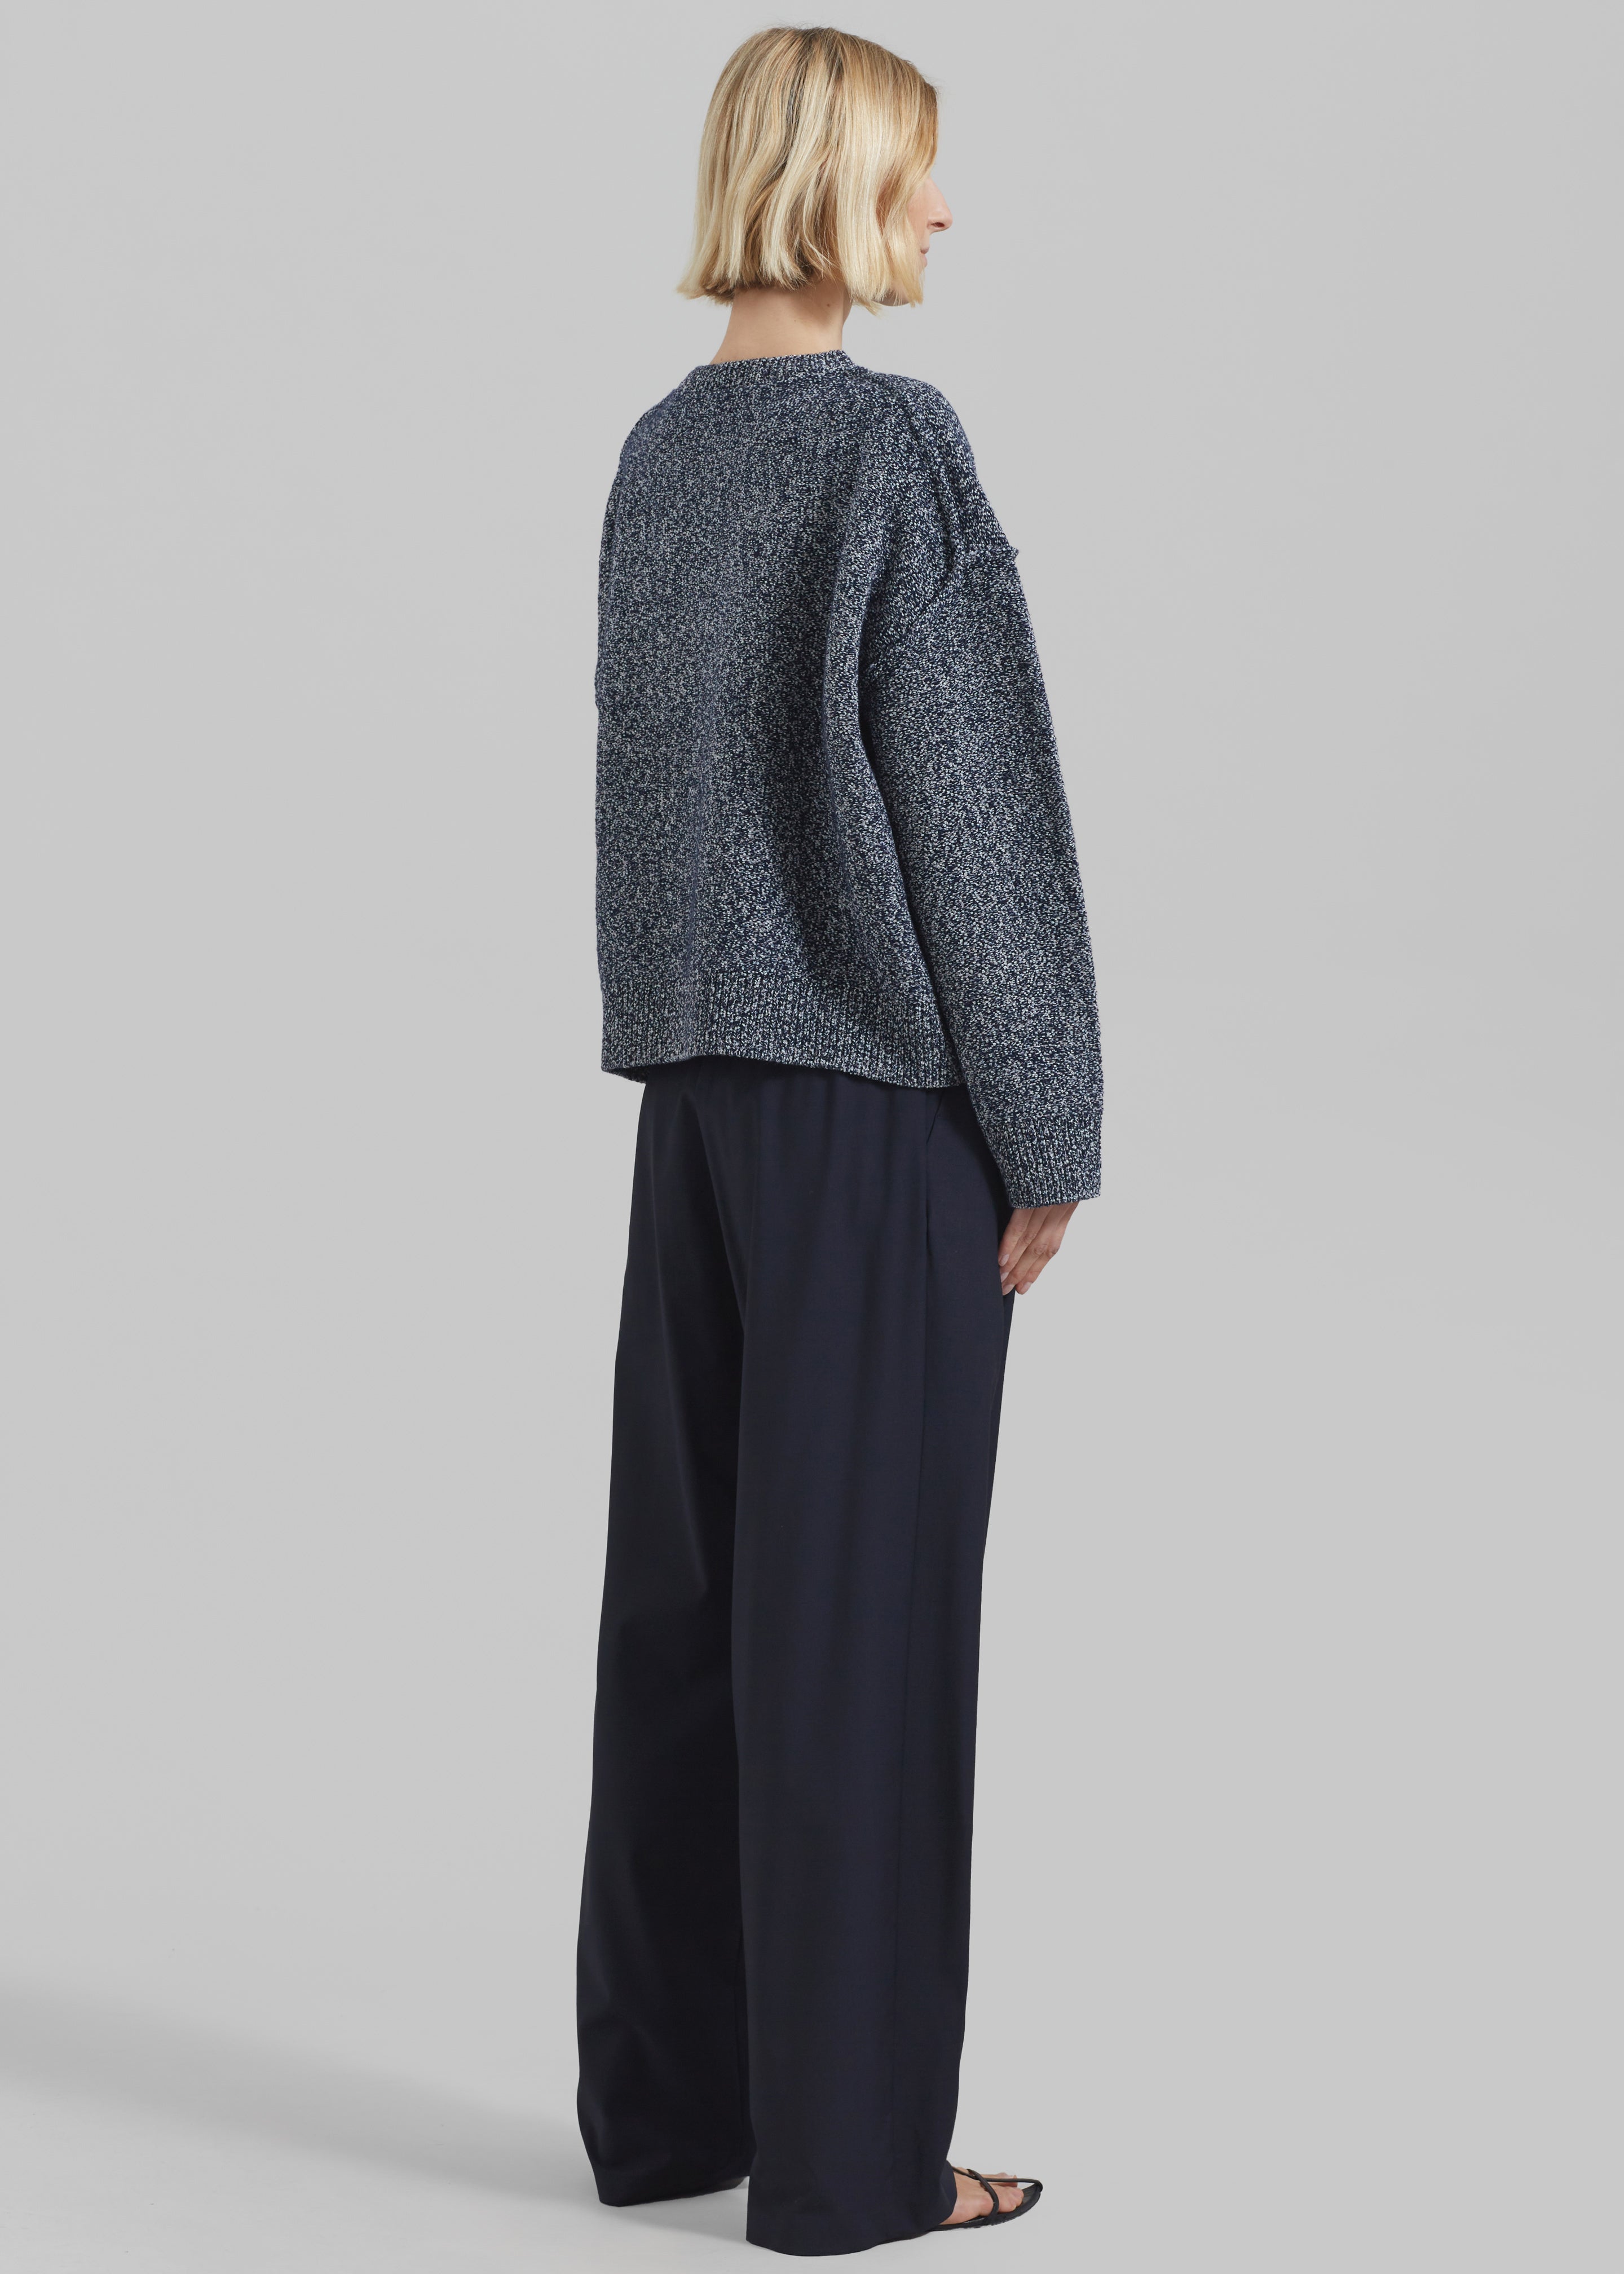 Proenza Schouler White Label Remy Sweater In Marled Knits - Dark Blue/Off White - 6